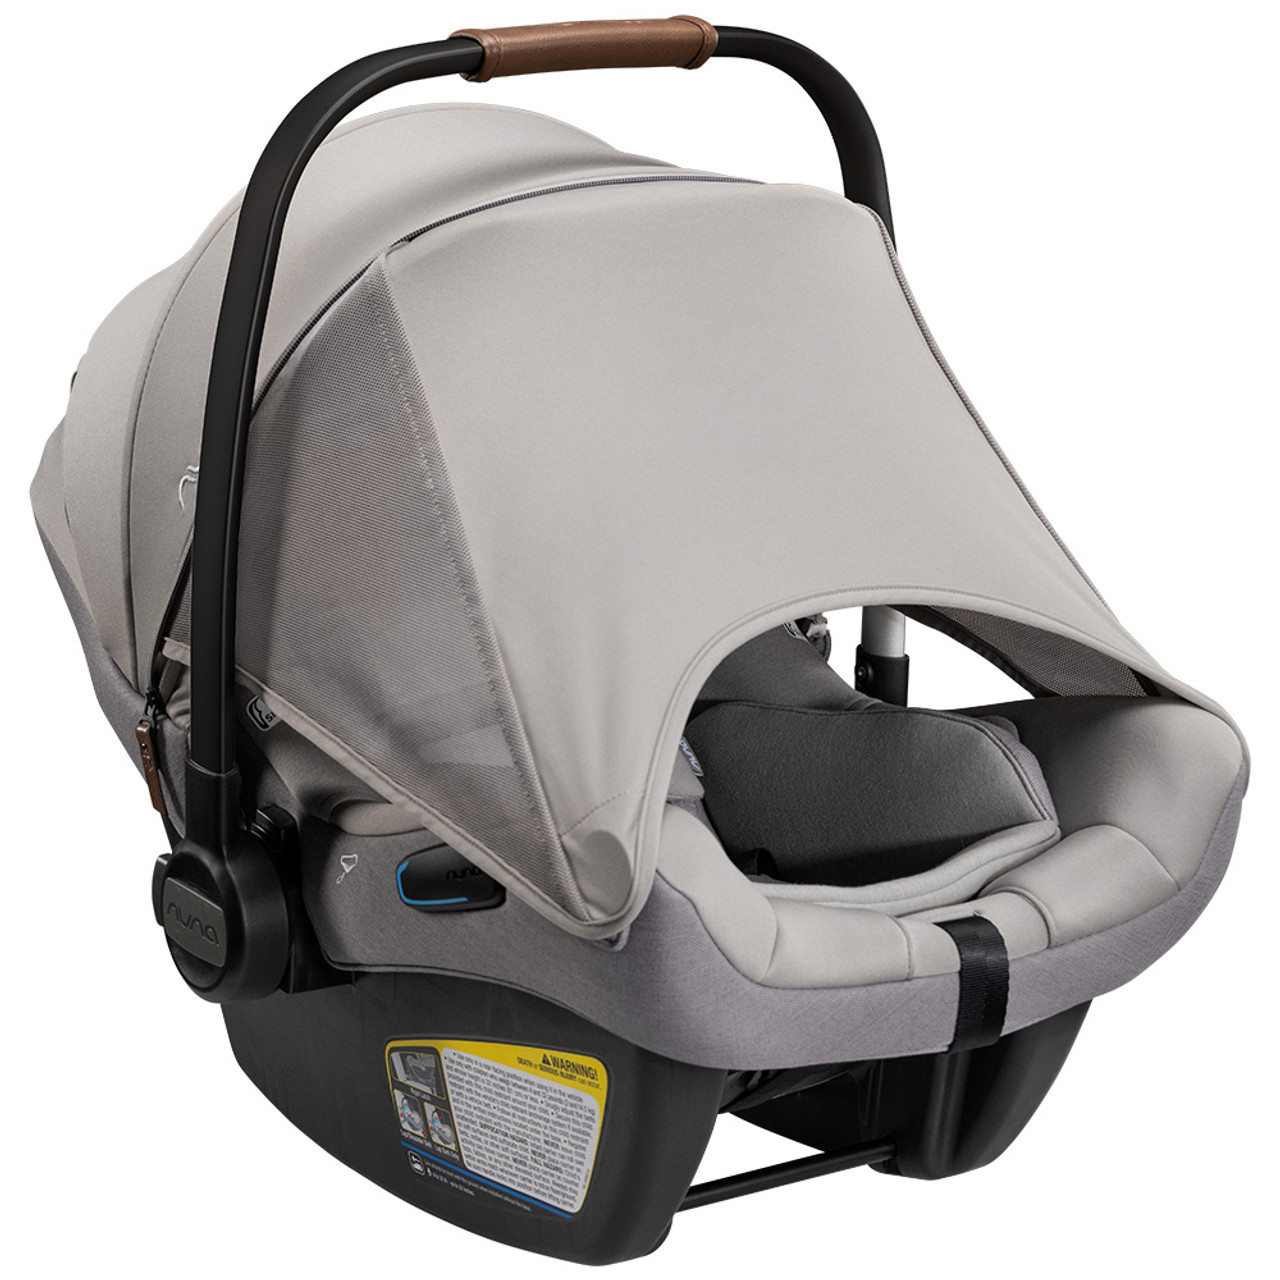 Infant Car Seats by Nuna | Buy Online - Bambibaby.com